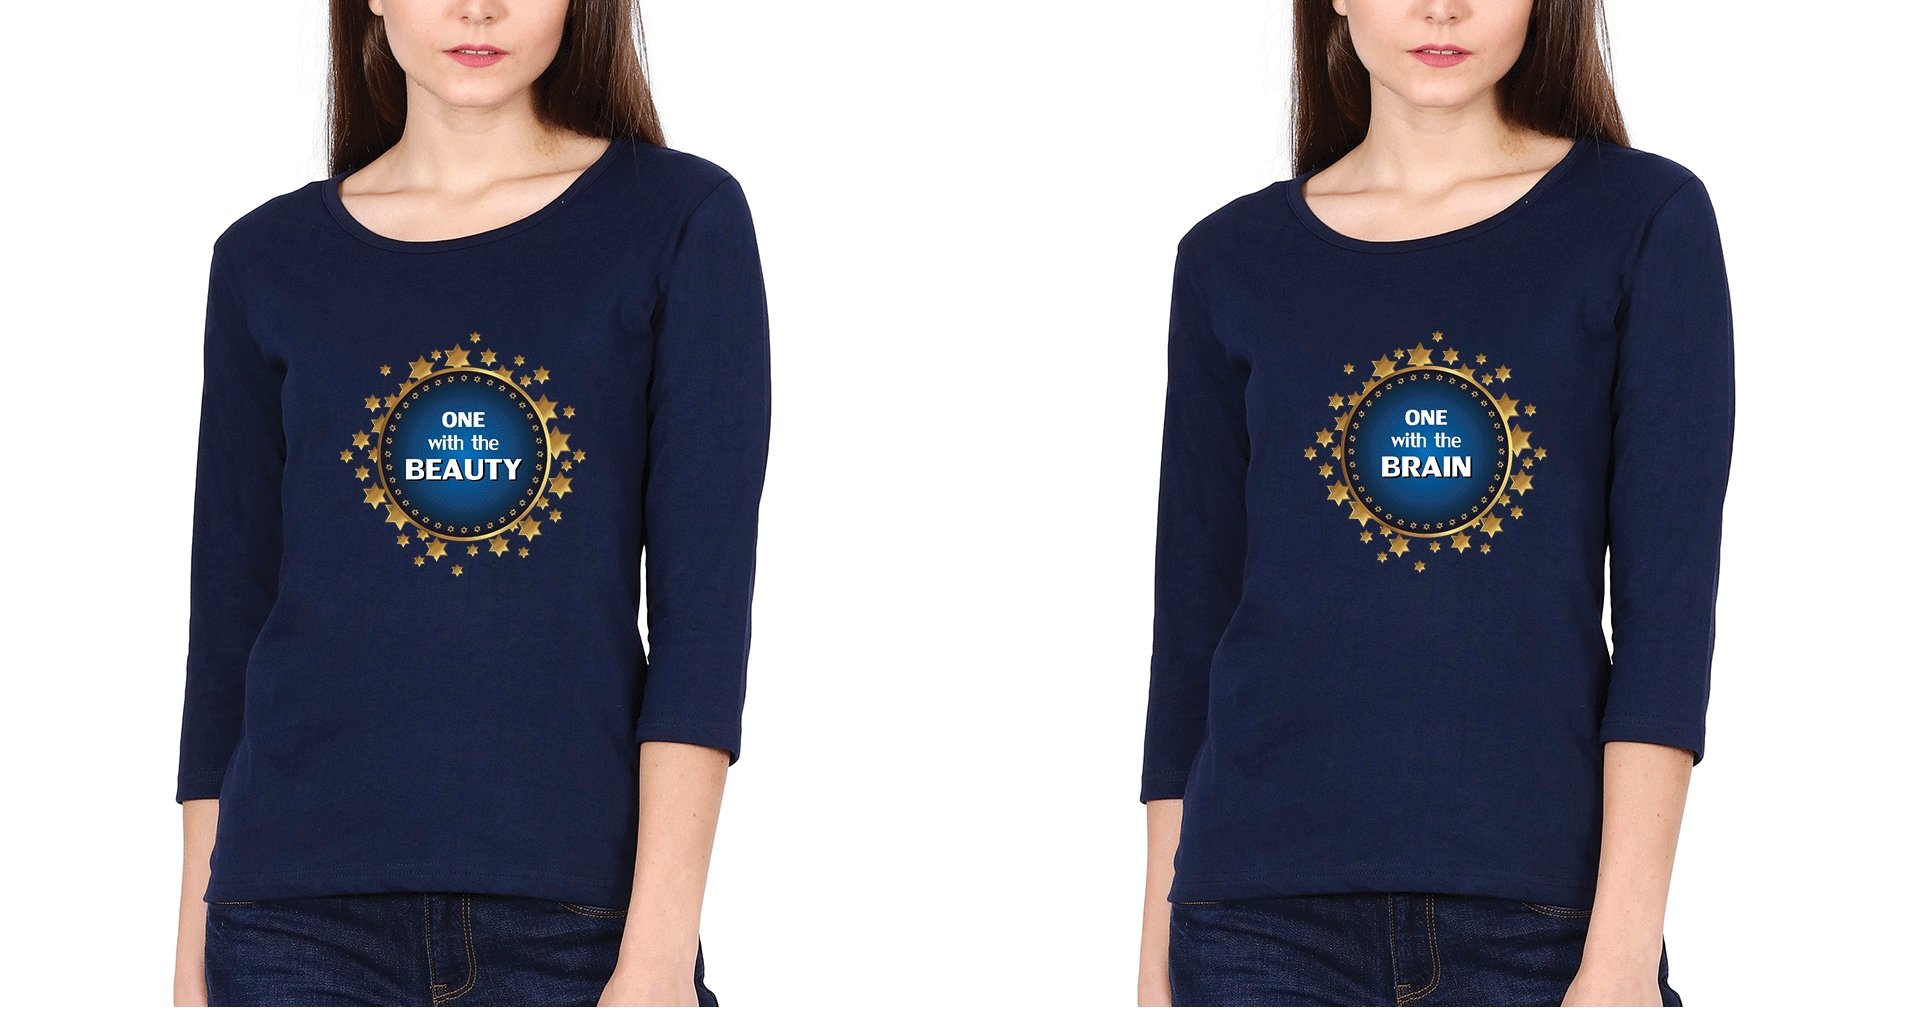 Beauty & Brain Sister Sister Full Sleeves T-Shirts -FunkyTradition - FunkyTradition